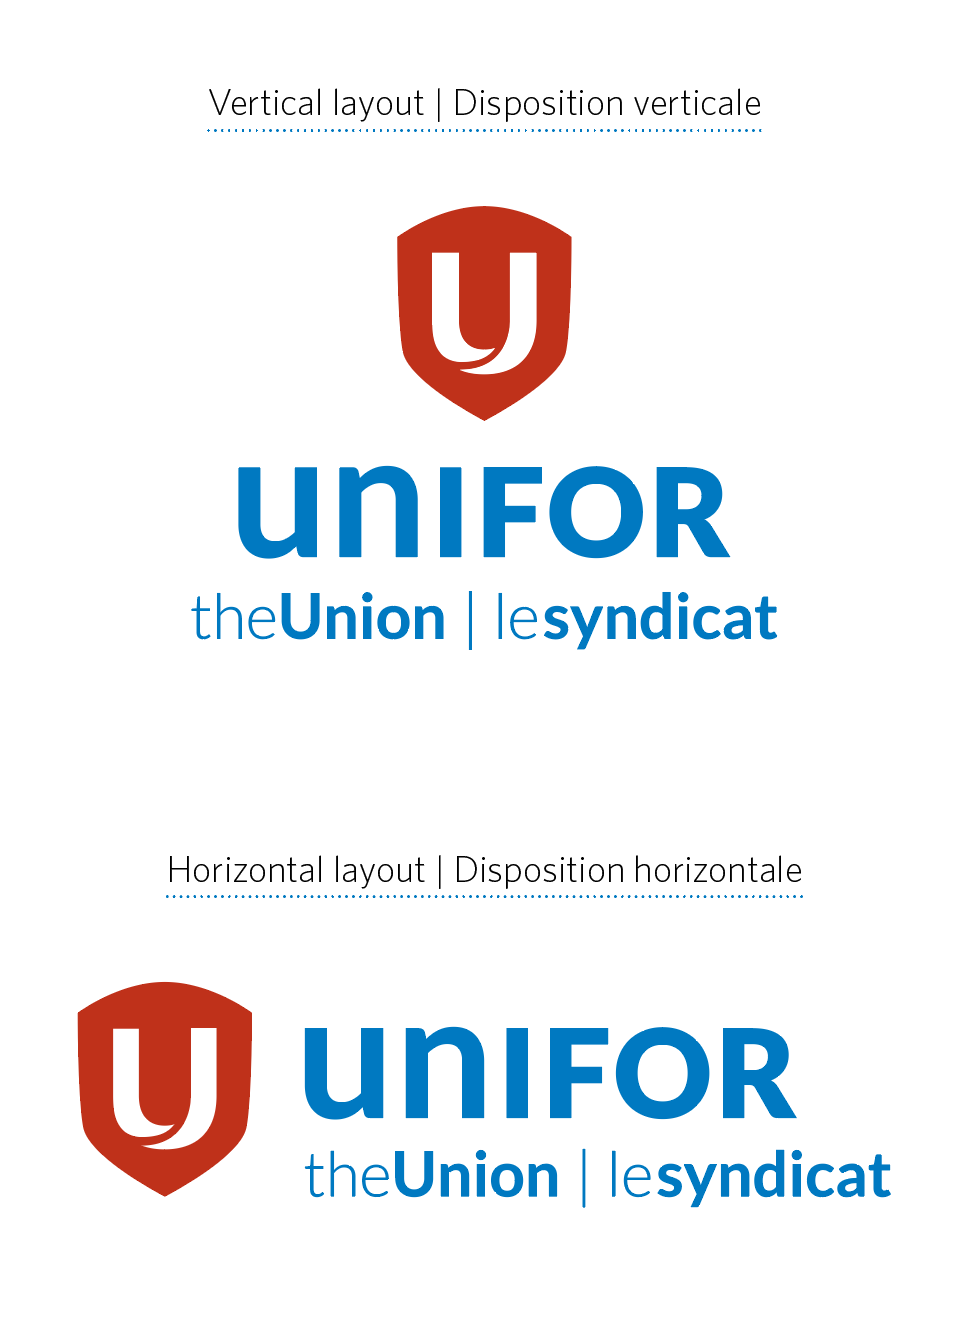 Unifor logos in vertical and horizontal orientations